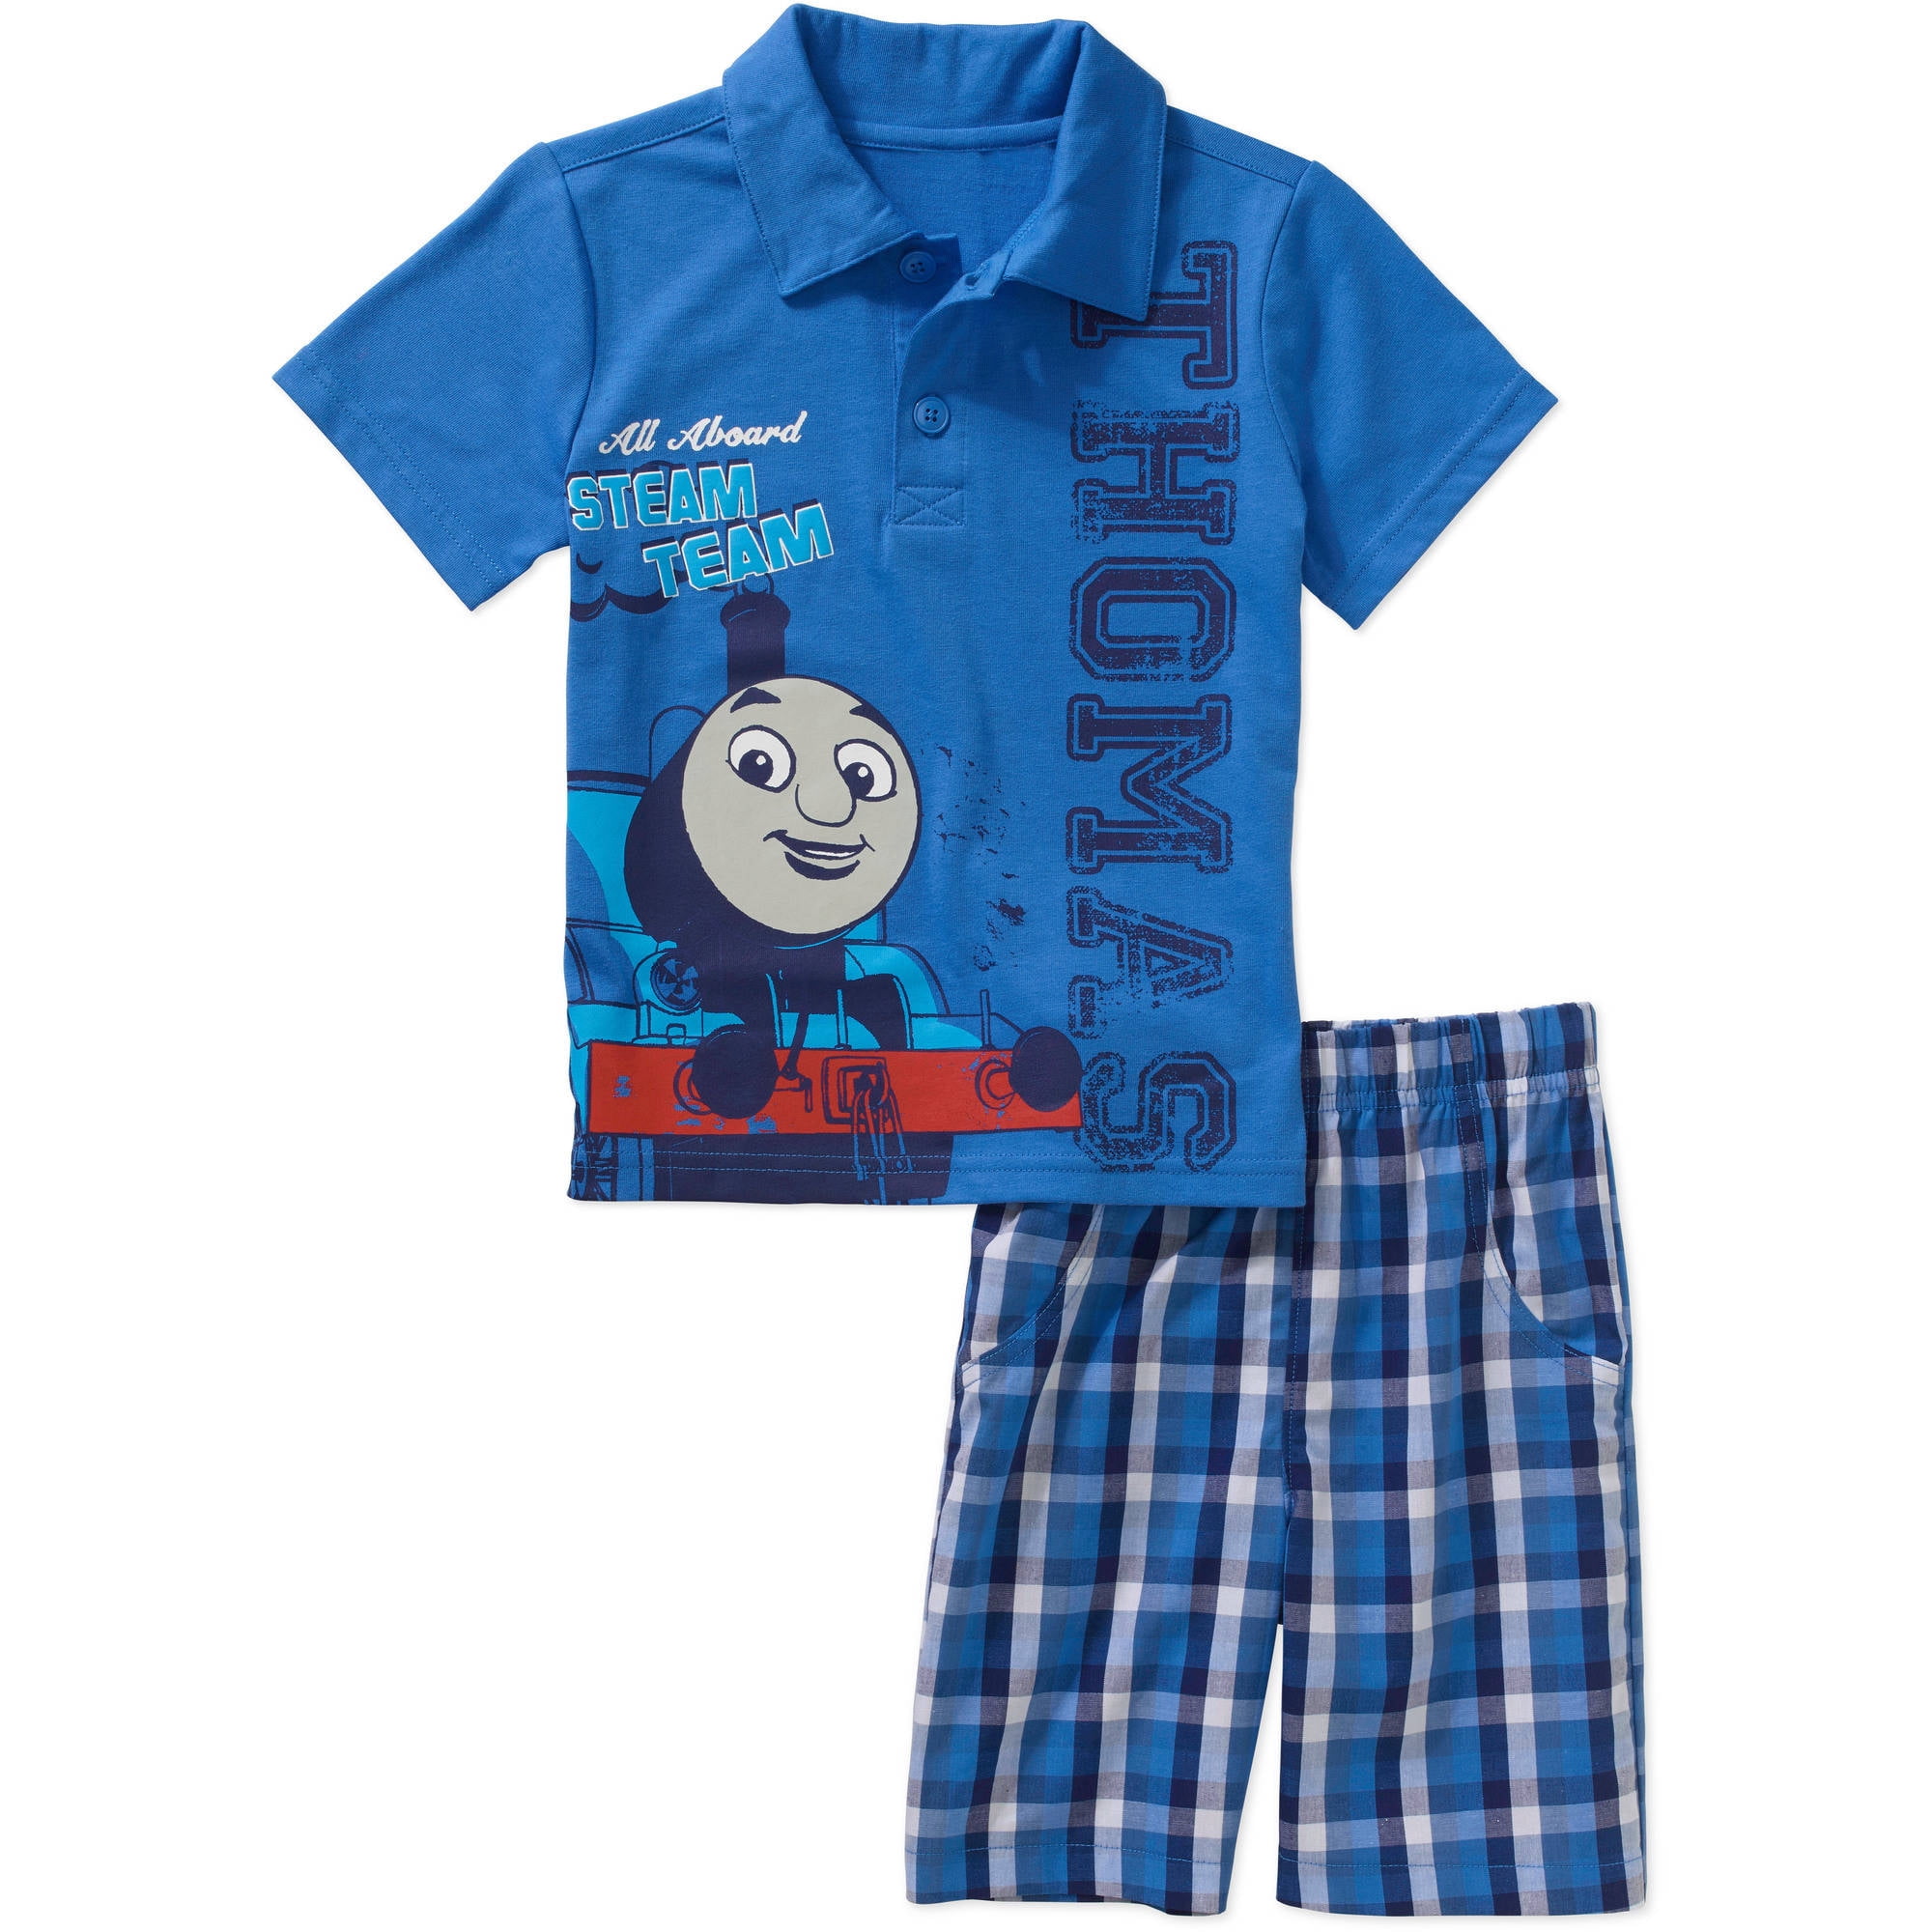 Thomas the Train Baby Toddler Boy Tee and Shorts Outfit Set - Walmart.com